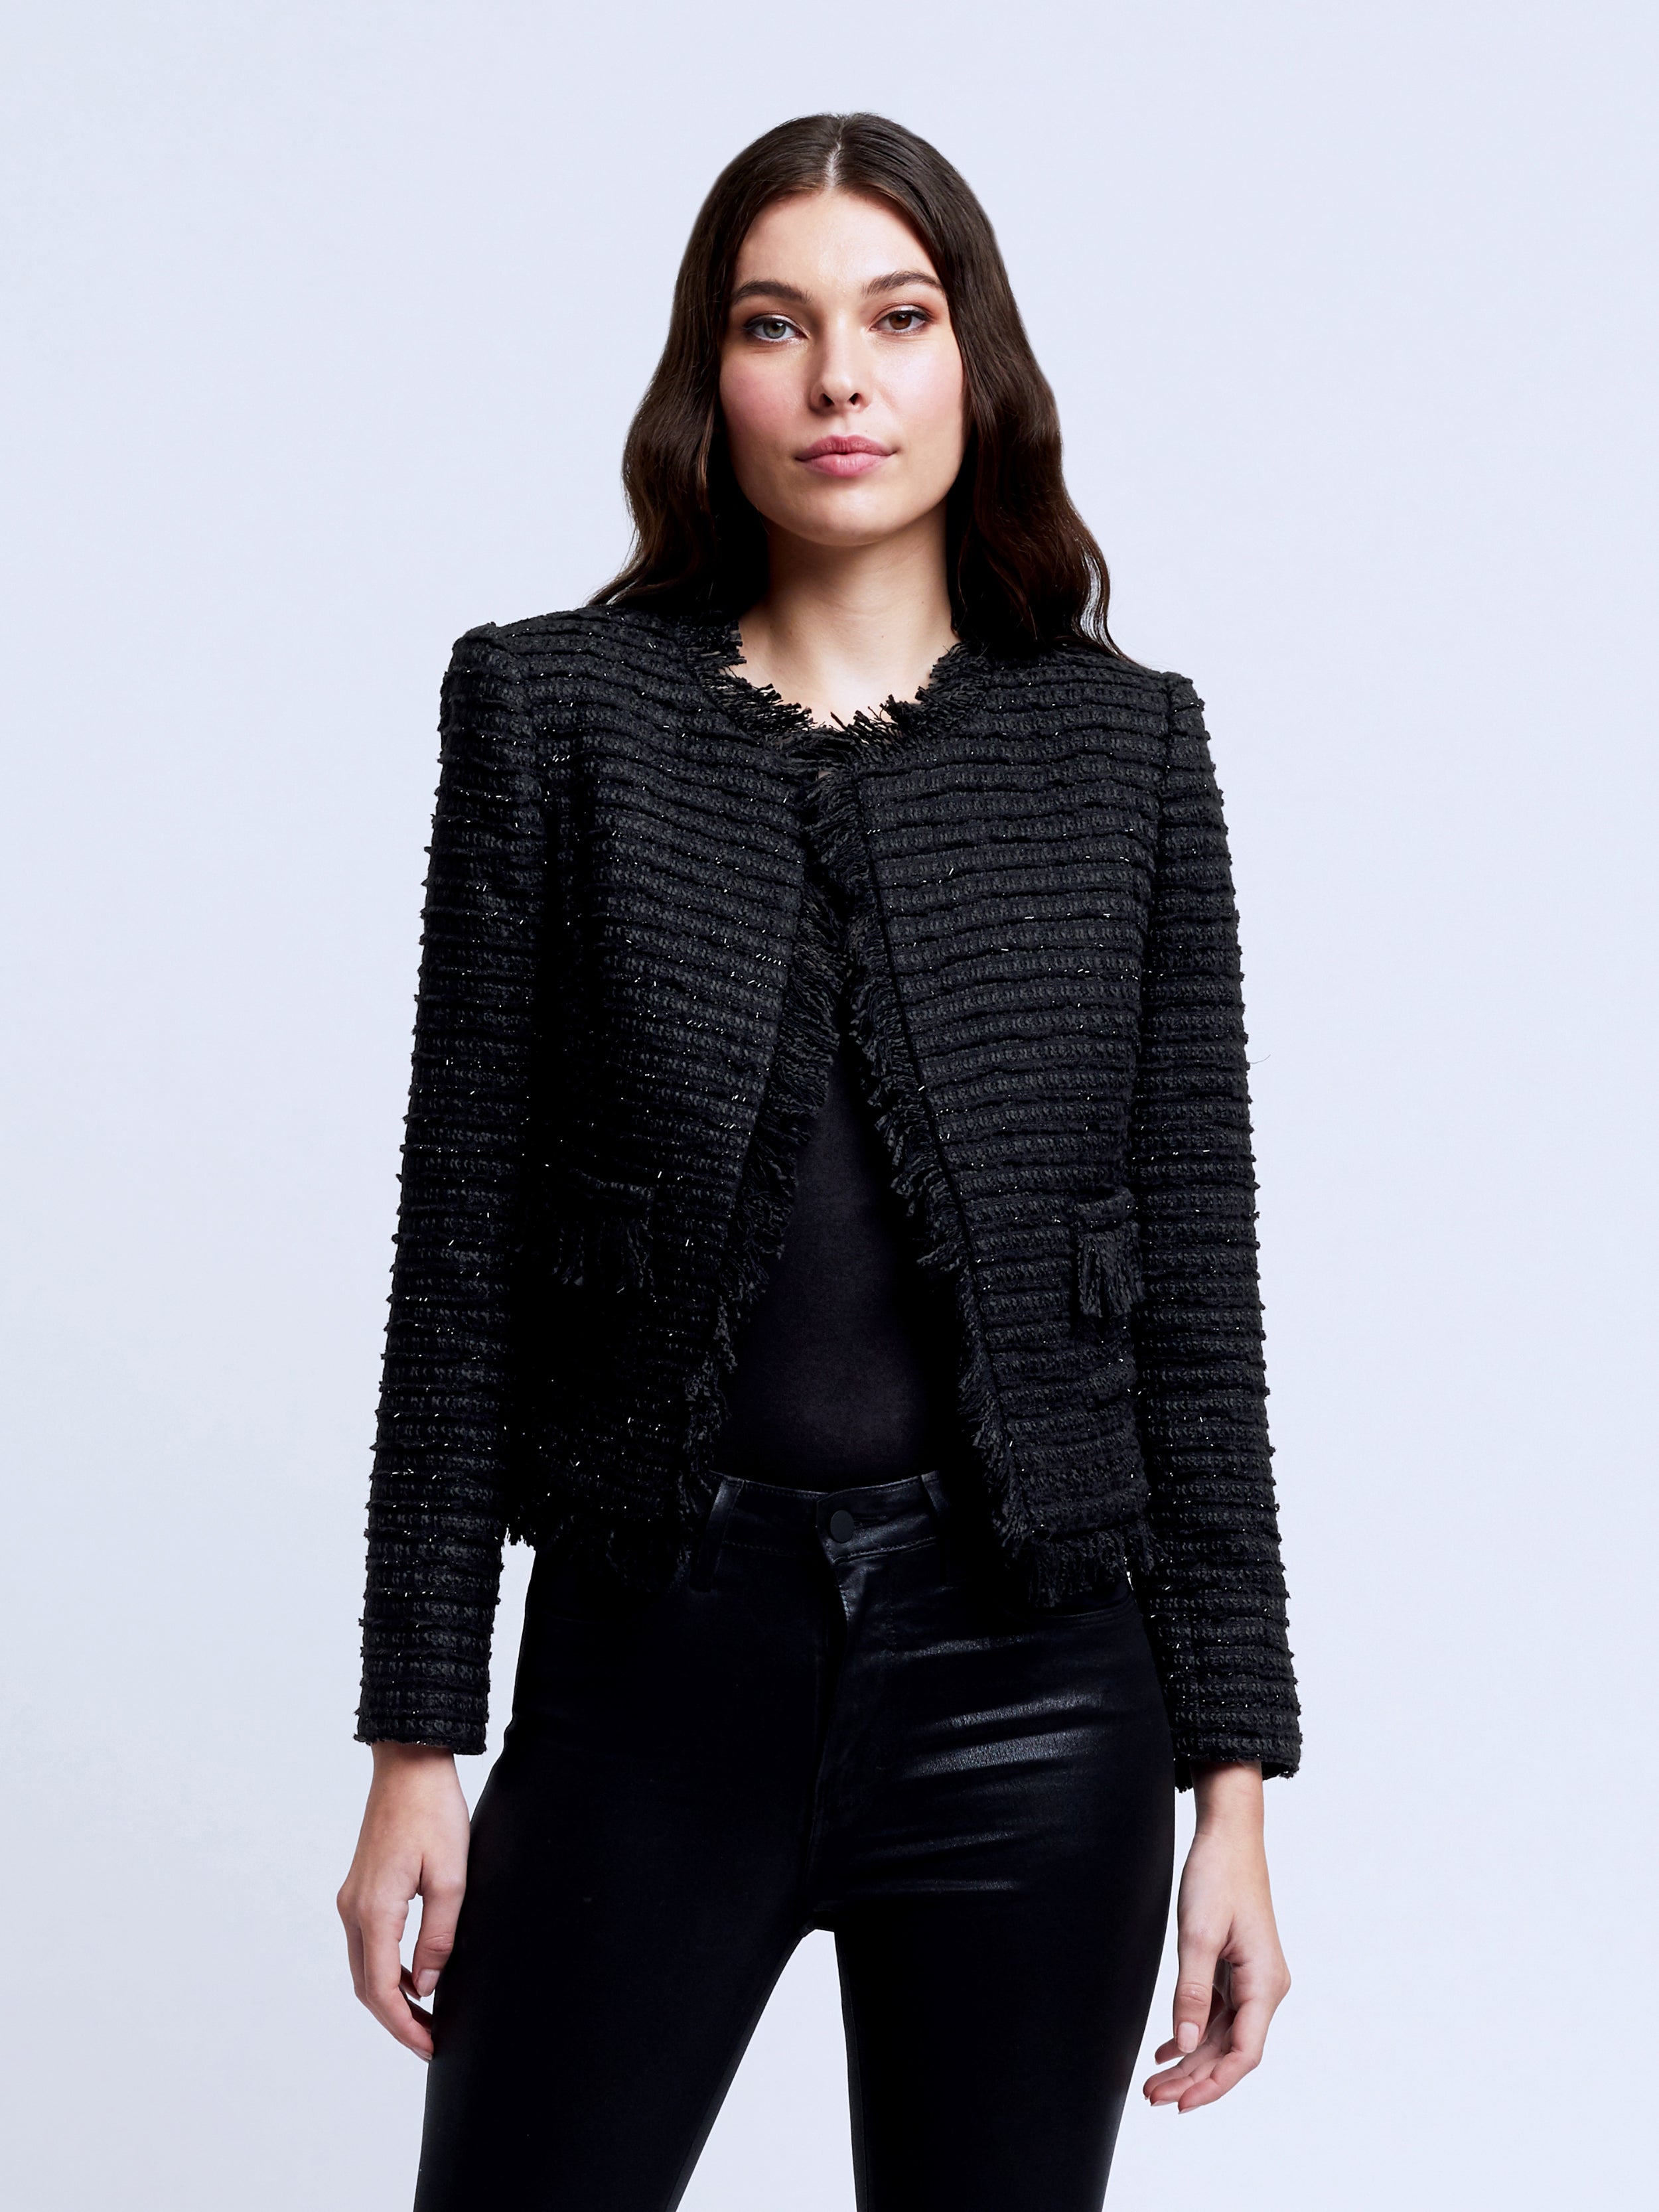 Black Trouser Outfits + Chanel inspired tweed sweater jacket